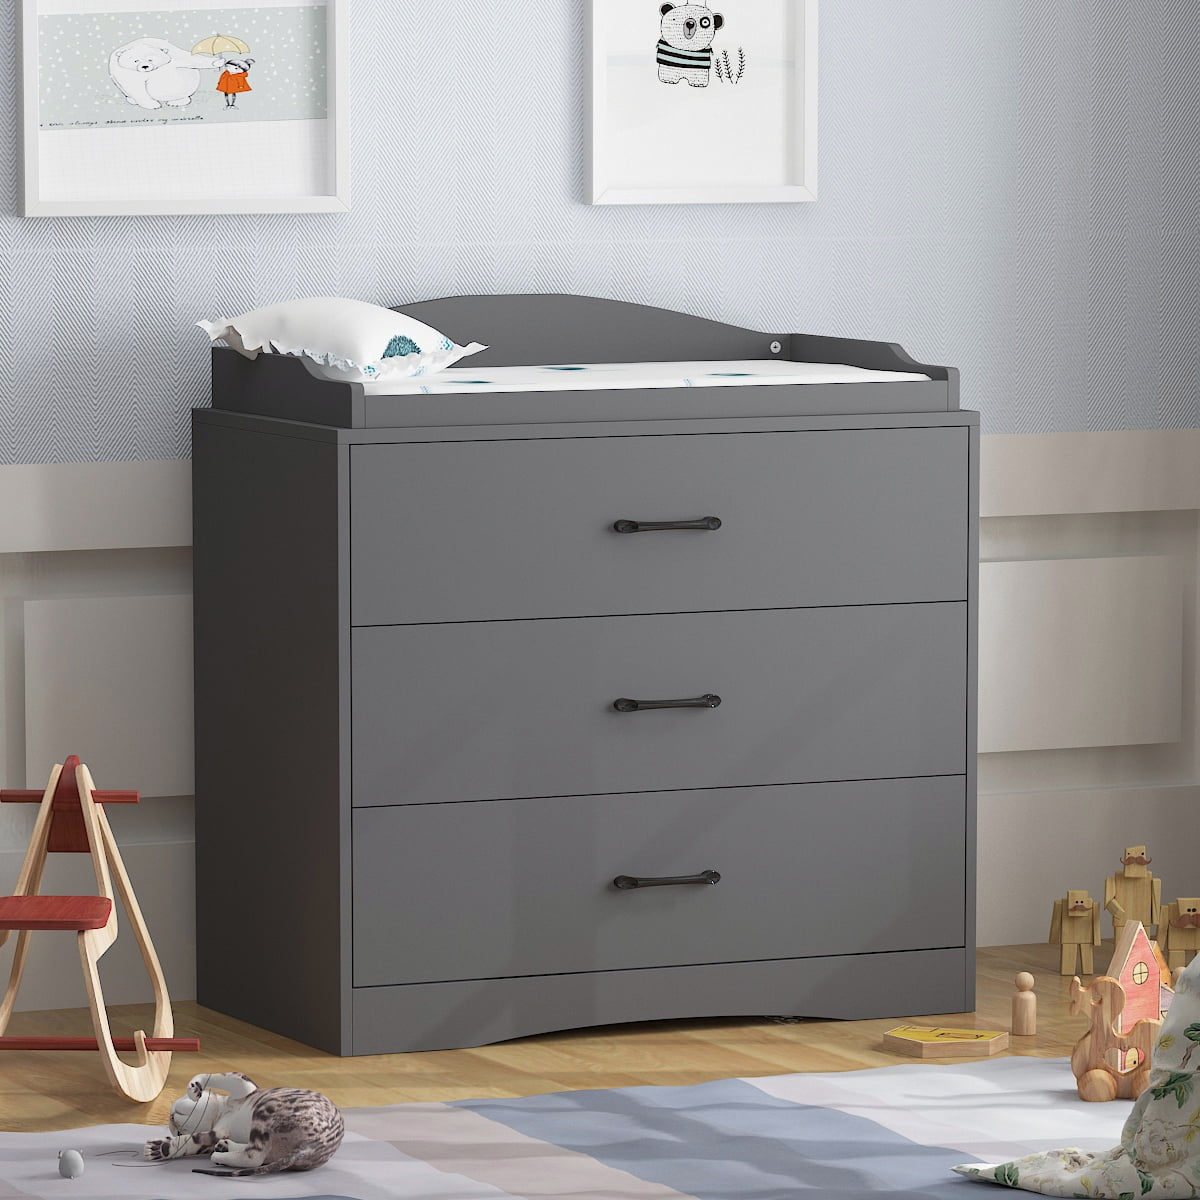 35.4”L x 19.5”W x 30.9”H FAMAPY Nursery Dresser with Wide Storage 3-Drawer Chest Dresser with Changing Top for Nursery Bedroom Black 